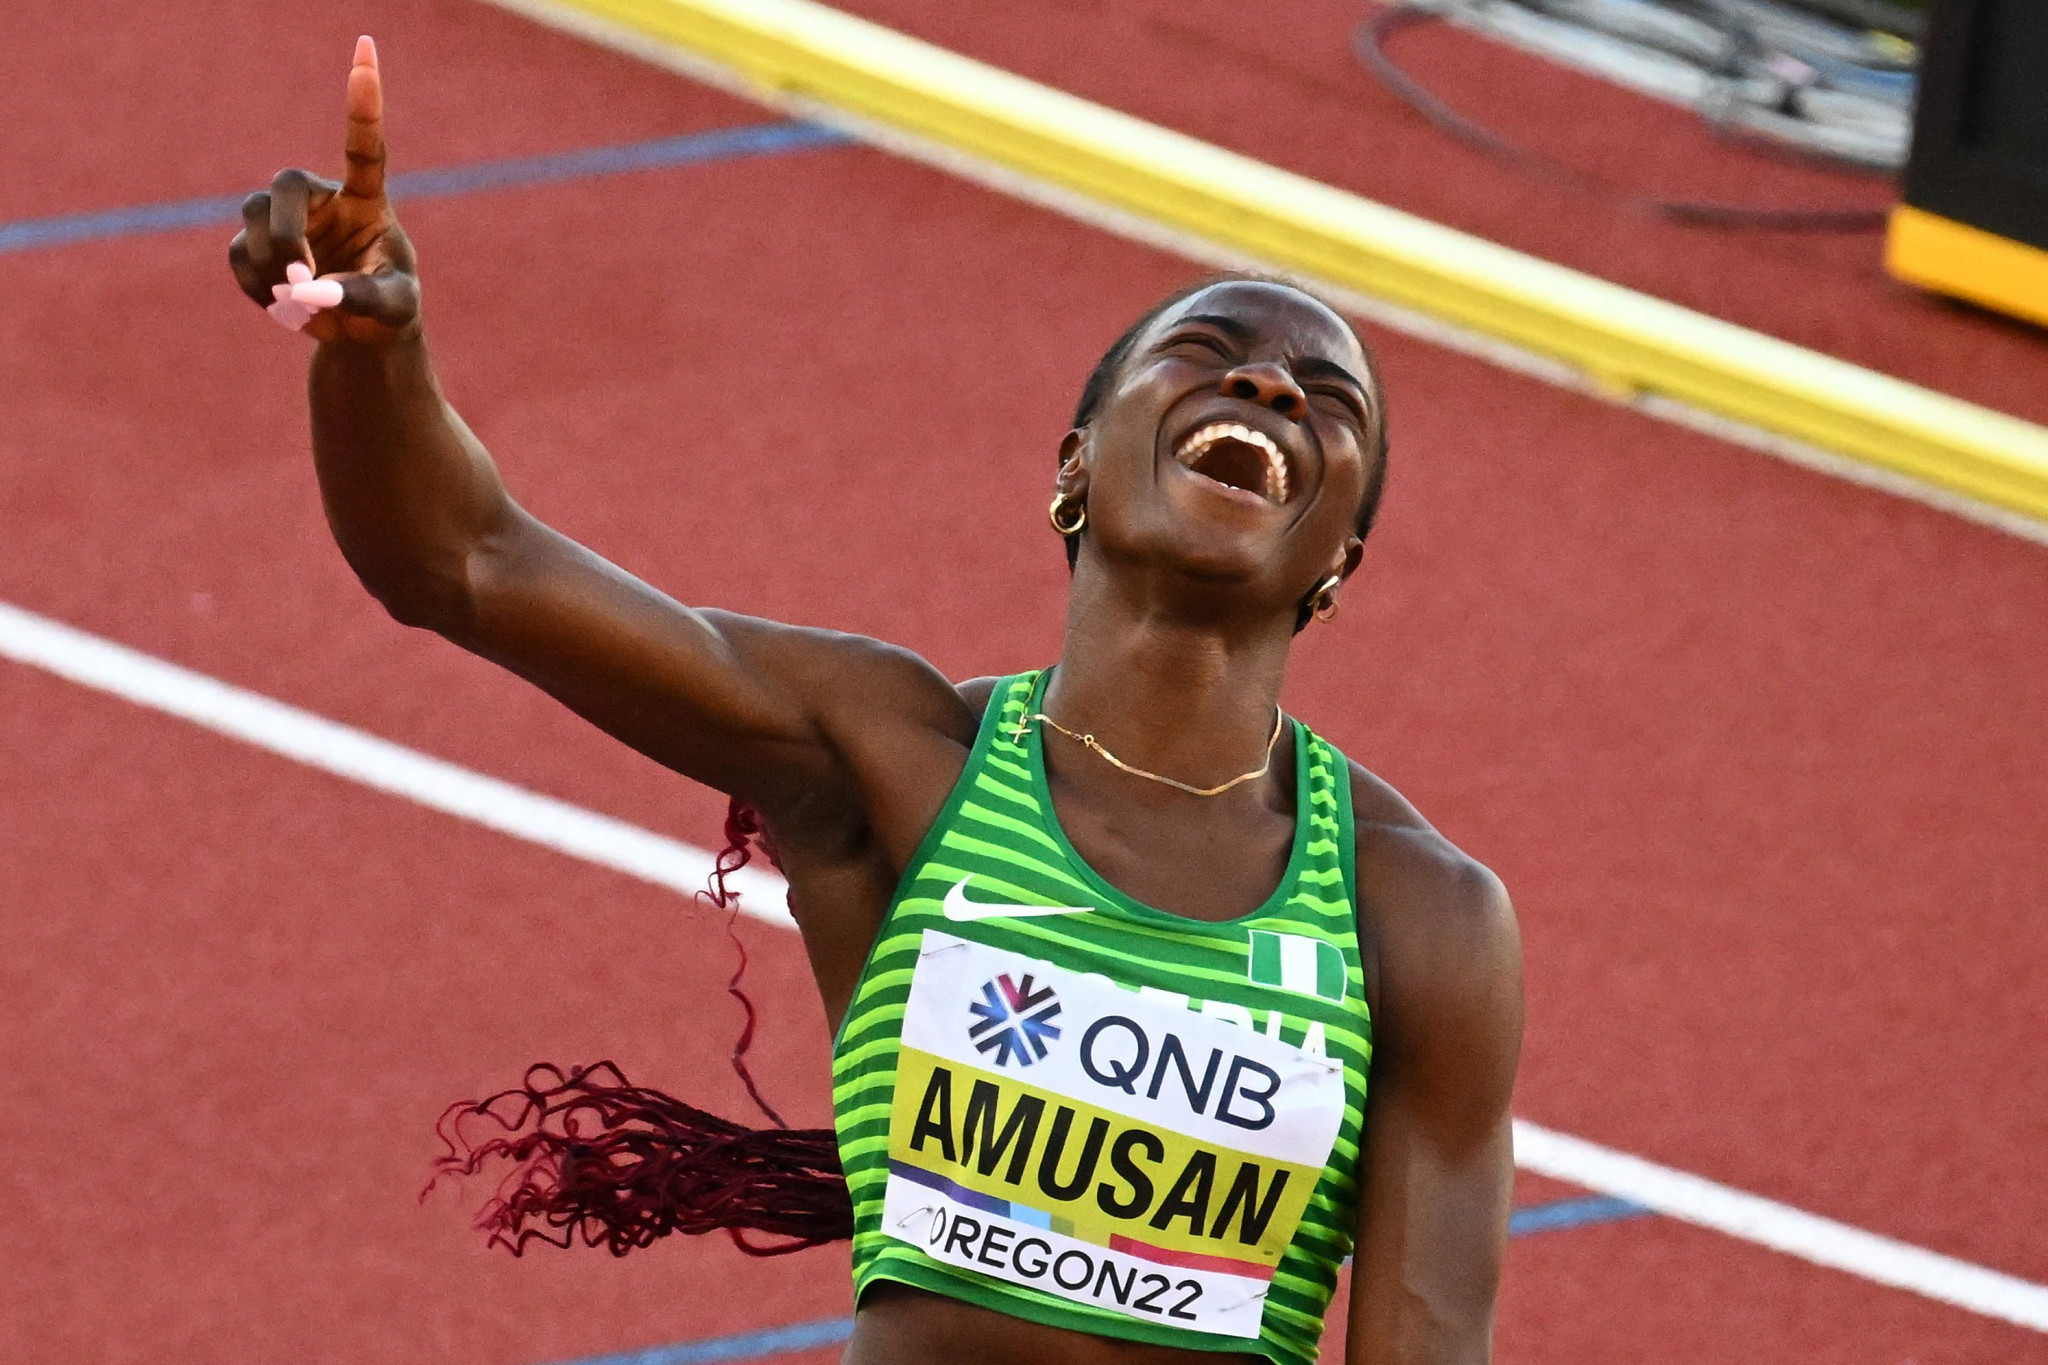 Nigeria's 100 metres hurdles world record holder and world champion Tobi Amusan is among the nine Champions for a Better World ©Getty Images